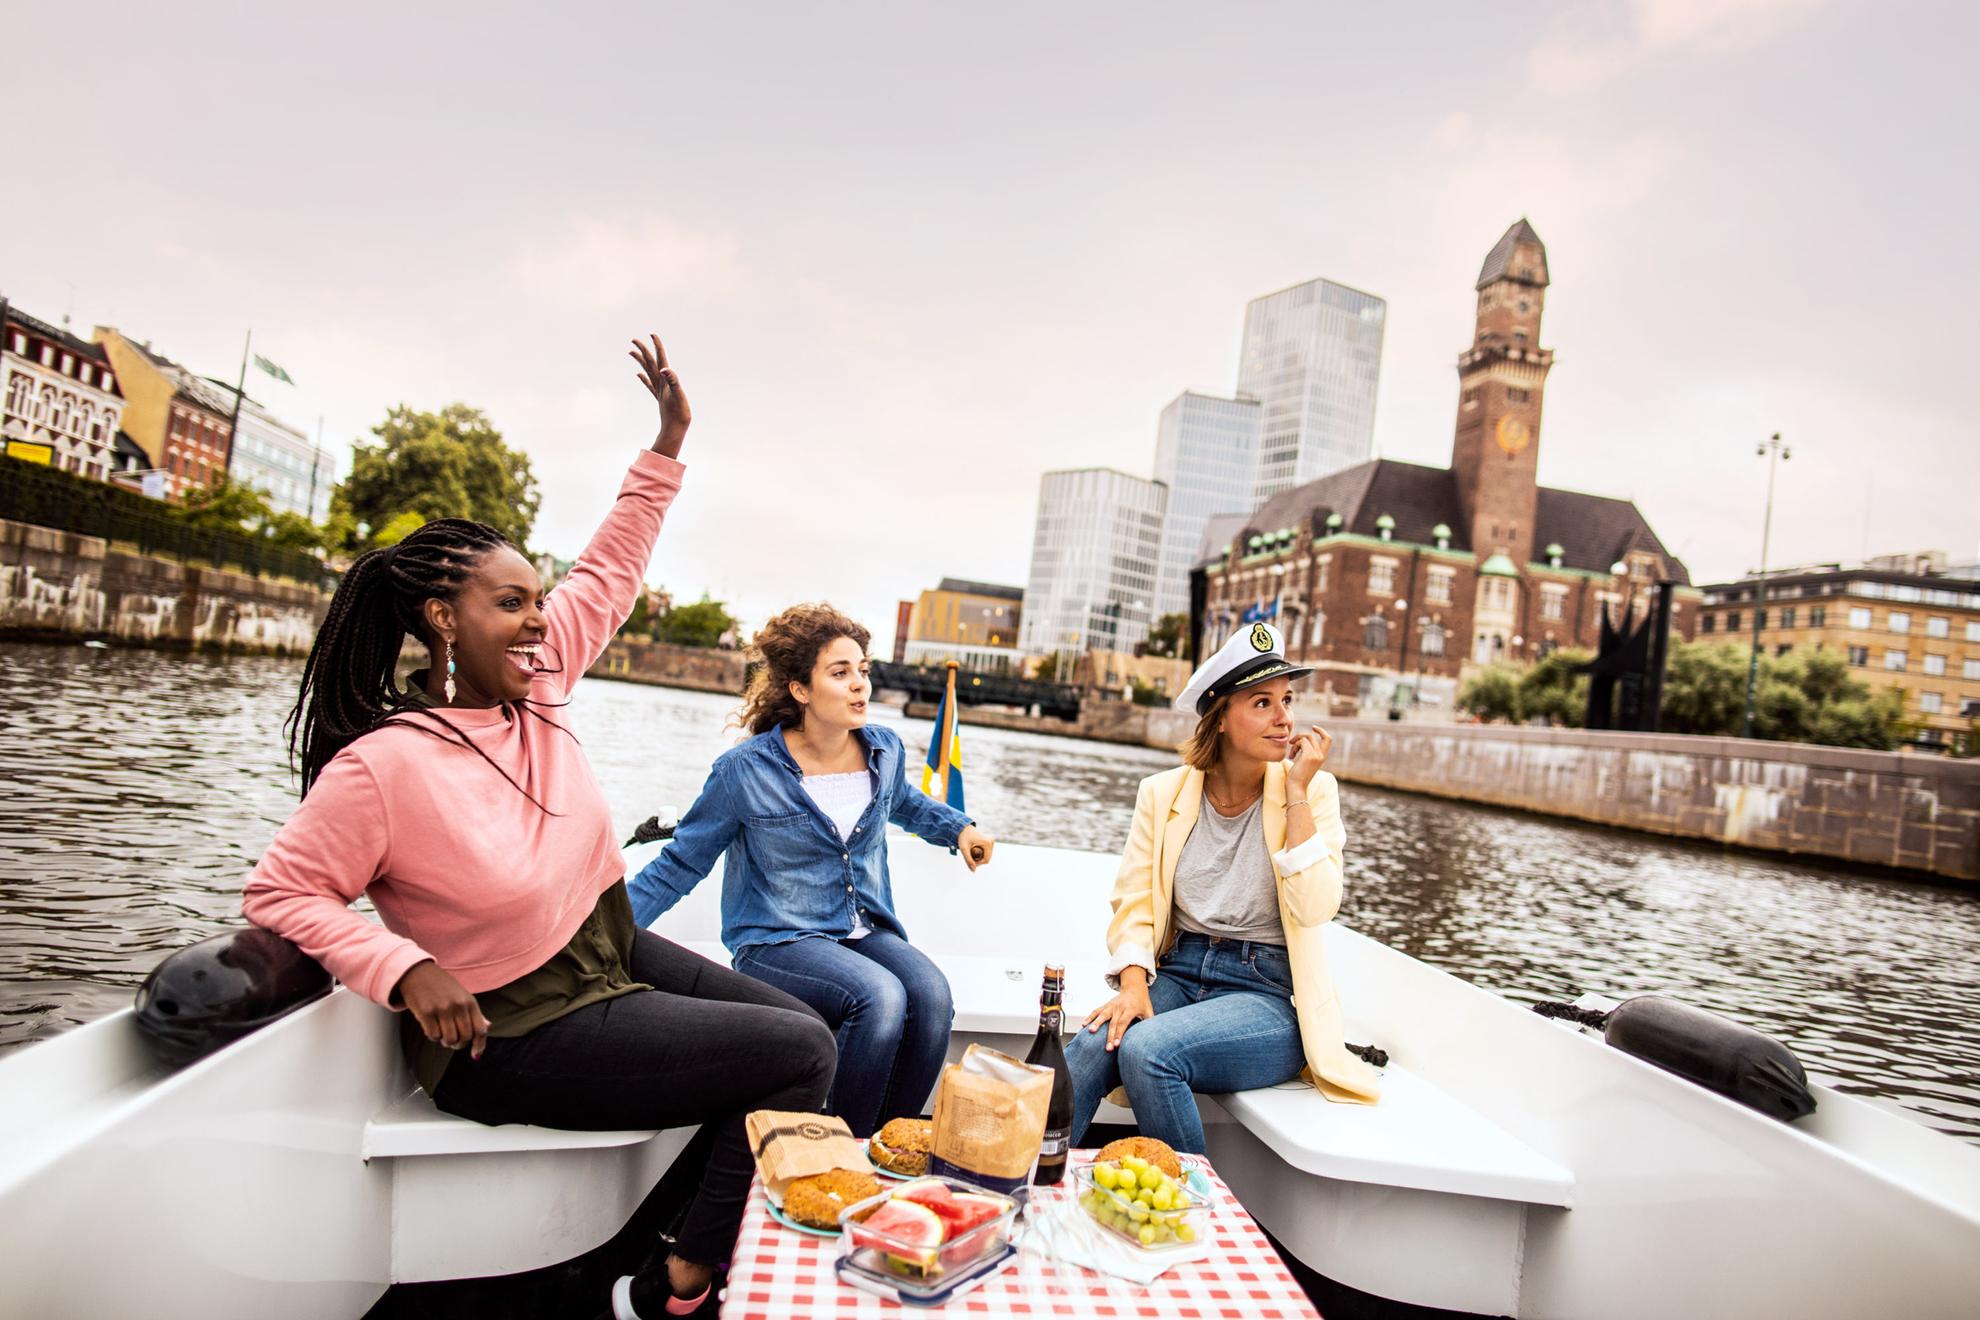 Three young happy women on an excursion in a boat on Malmö's canal with Malmö Live and the central station in the background.